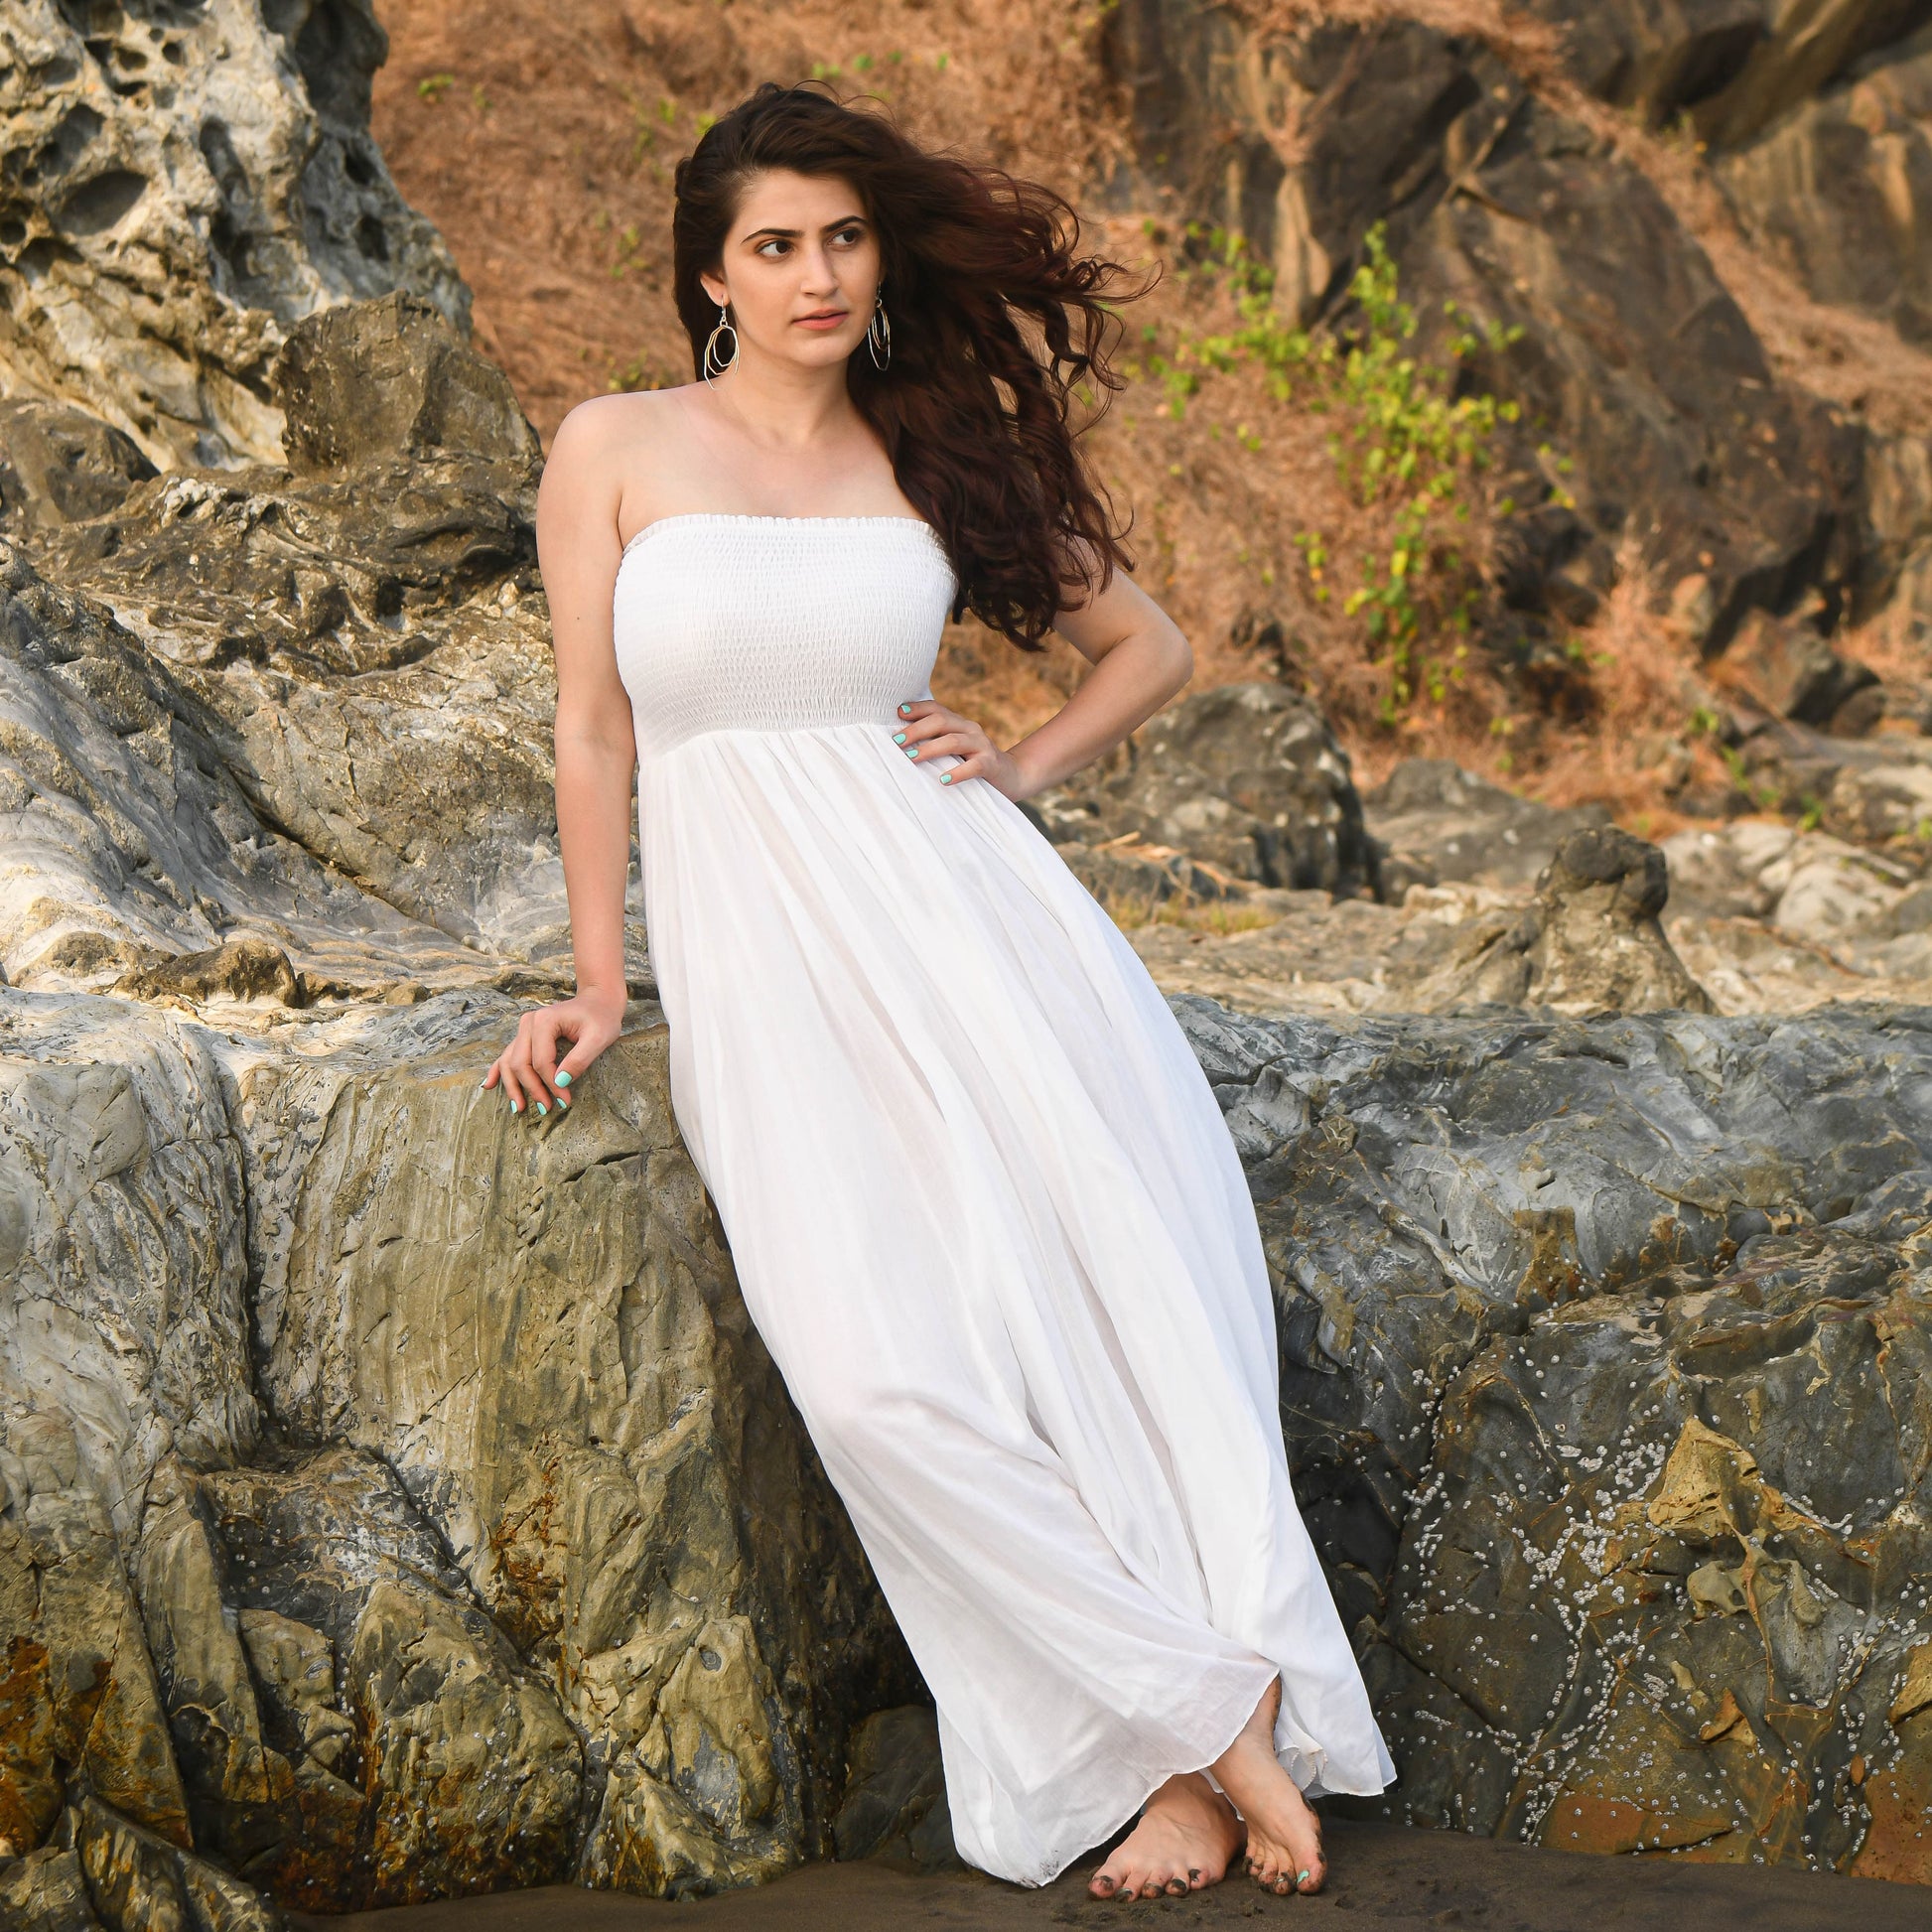 shop amazing quality white cotton dress online at best price